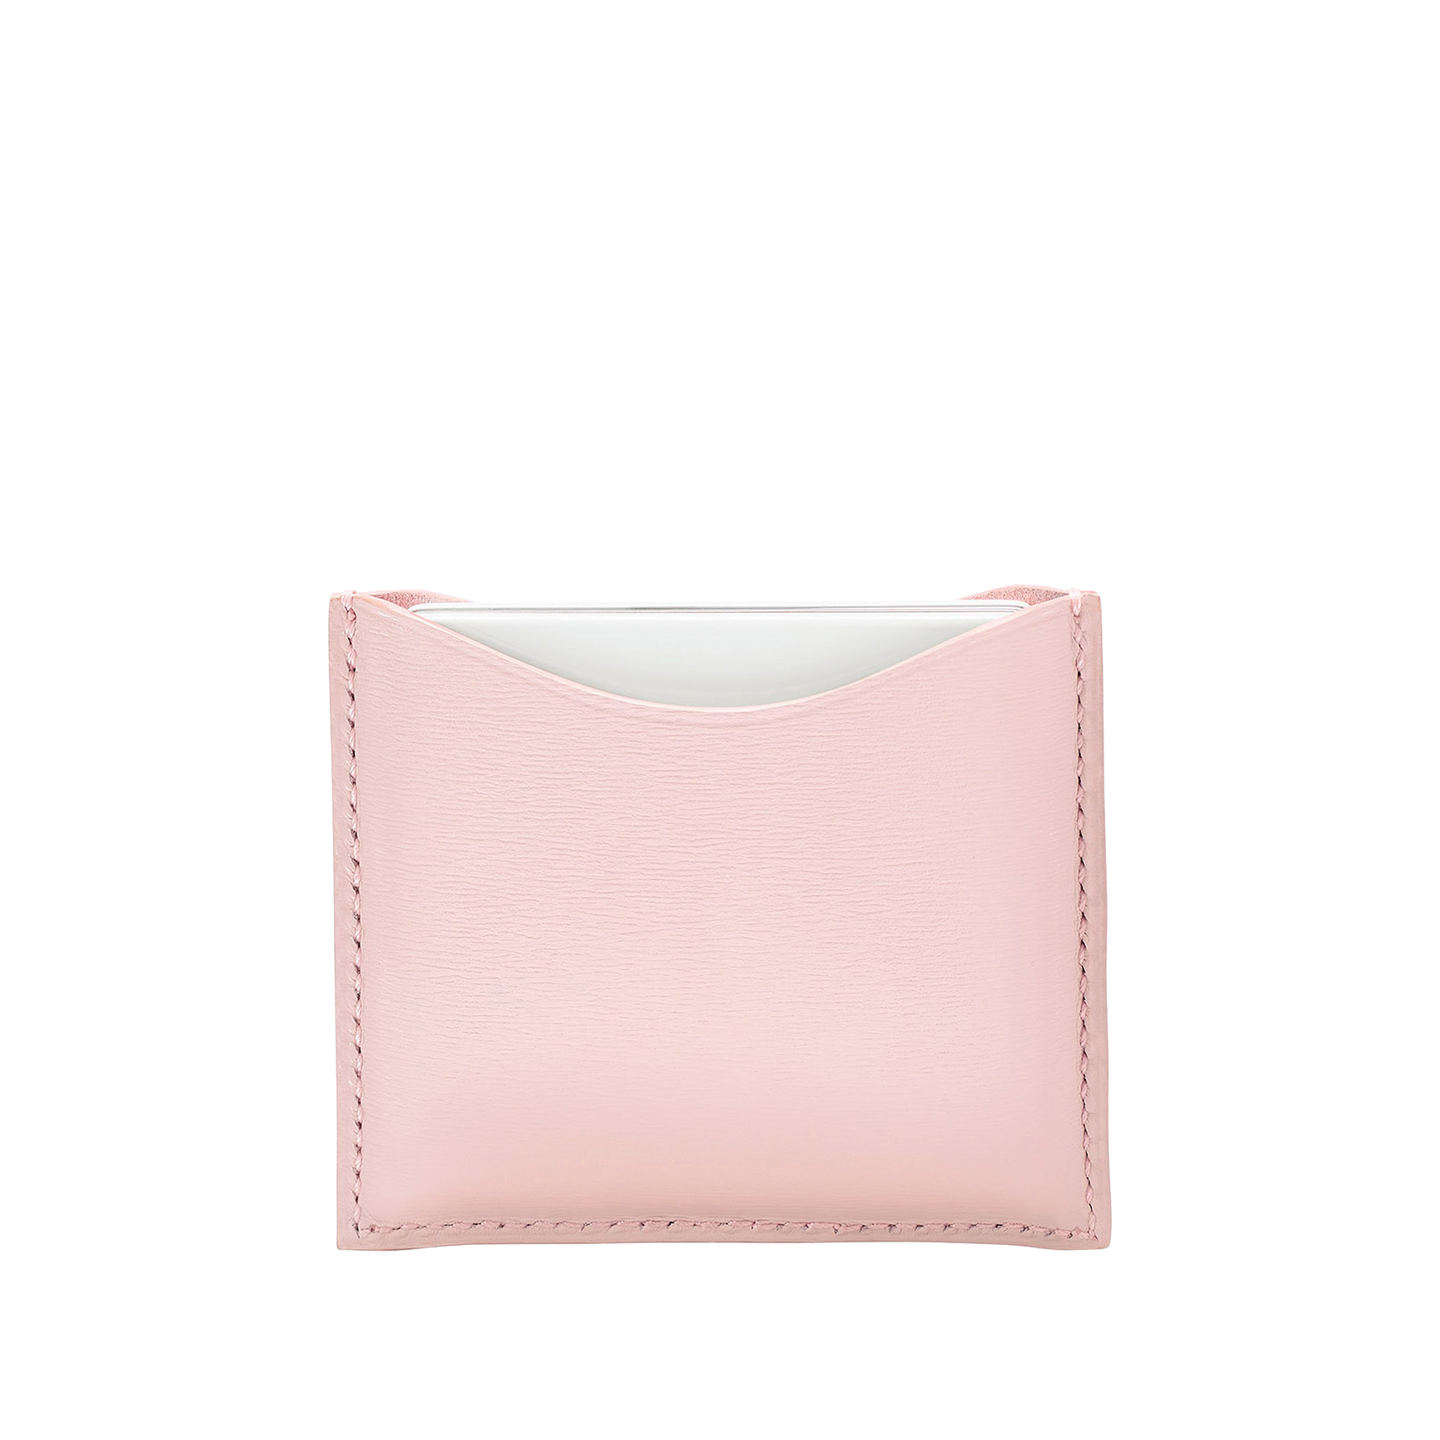 Refillable Pink fine leather powder case